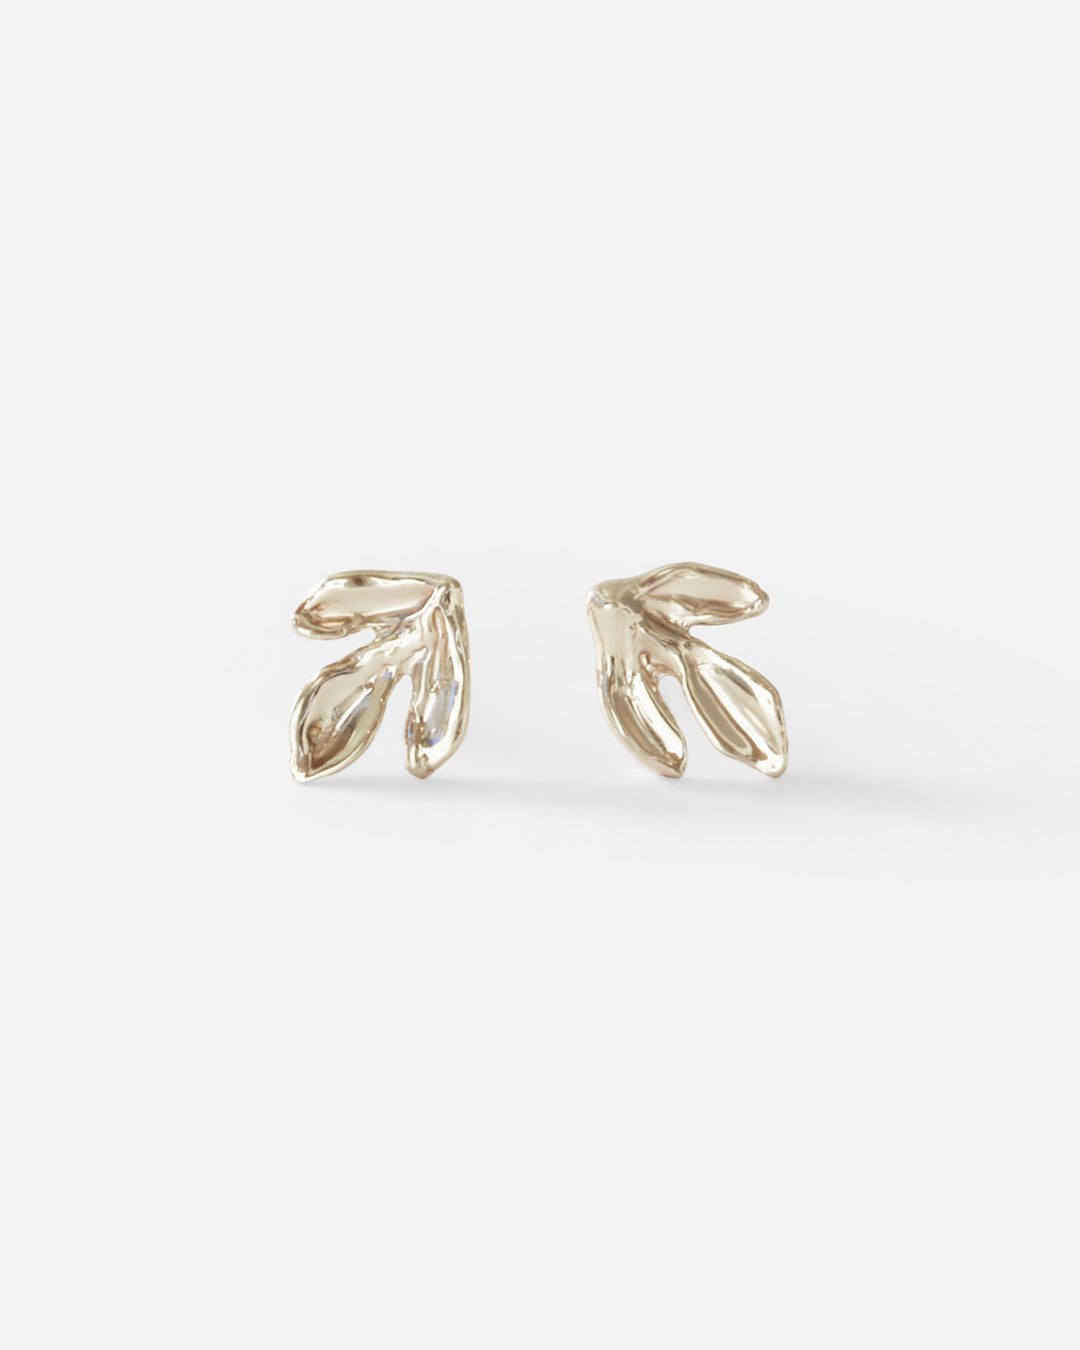 Leaf / White Studs By O Channell Designs